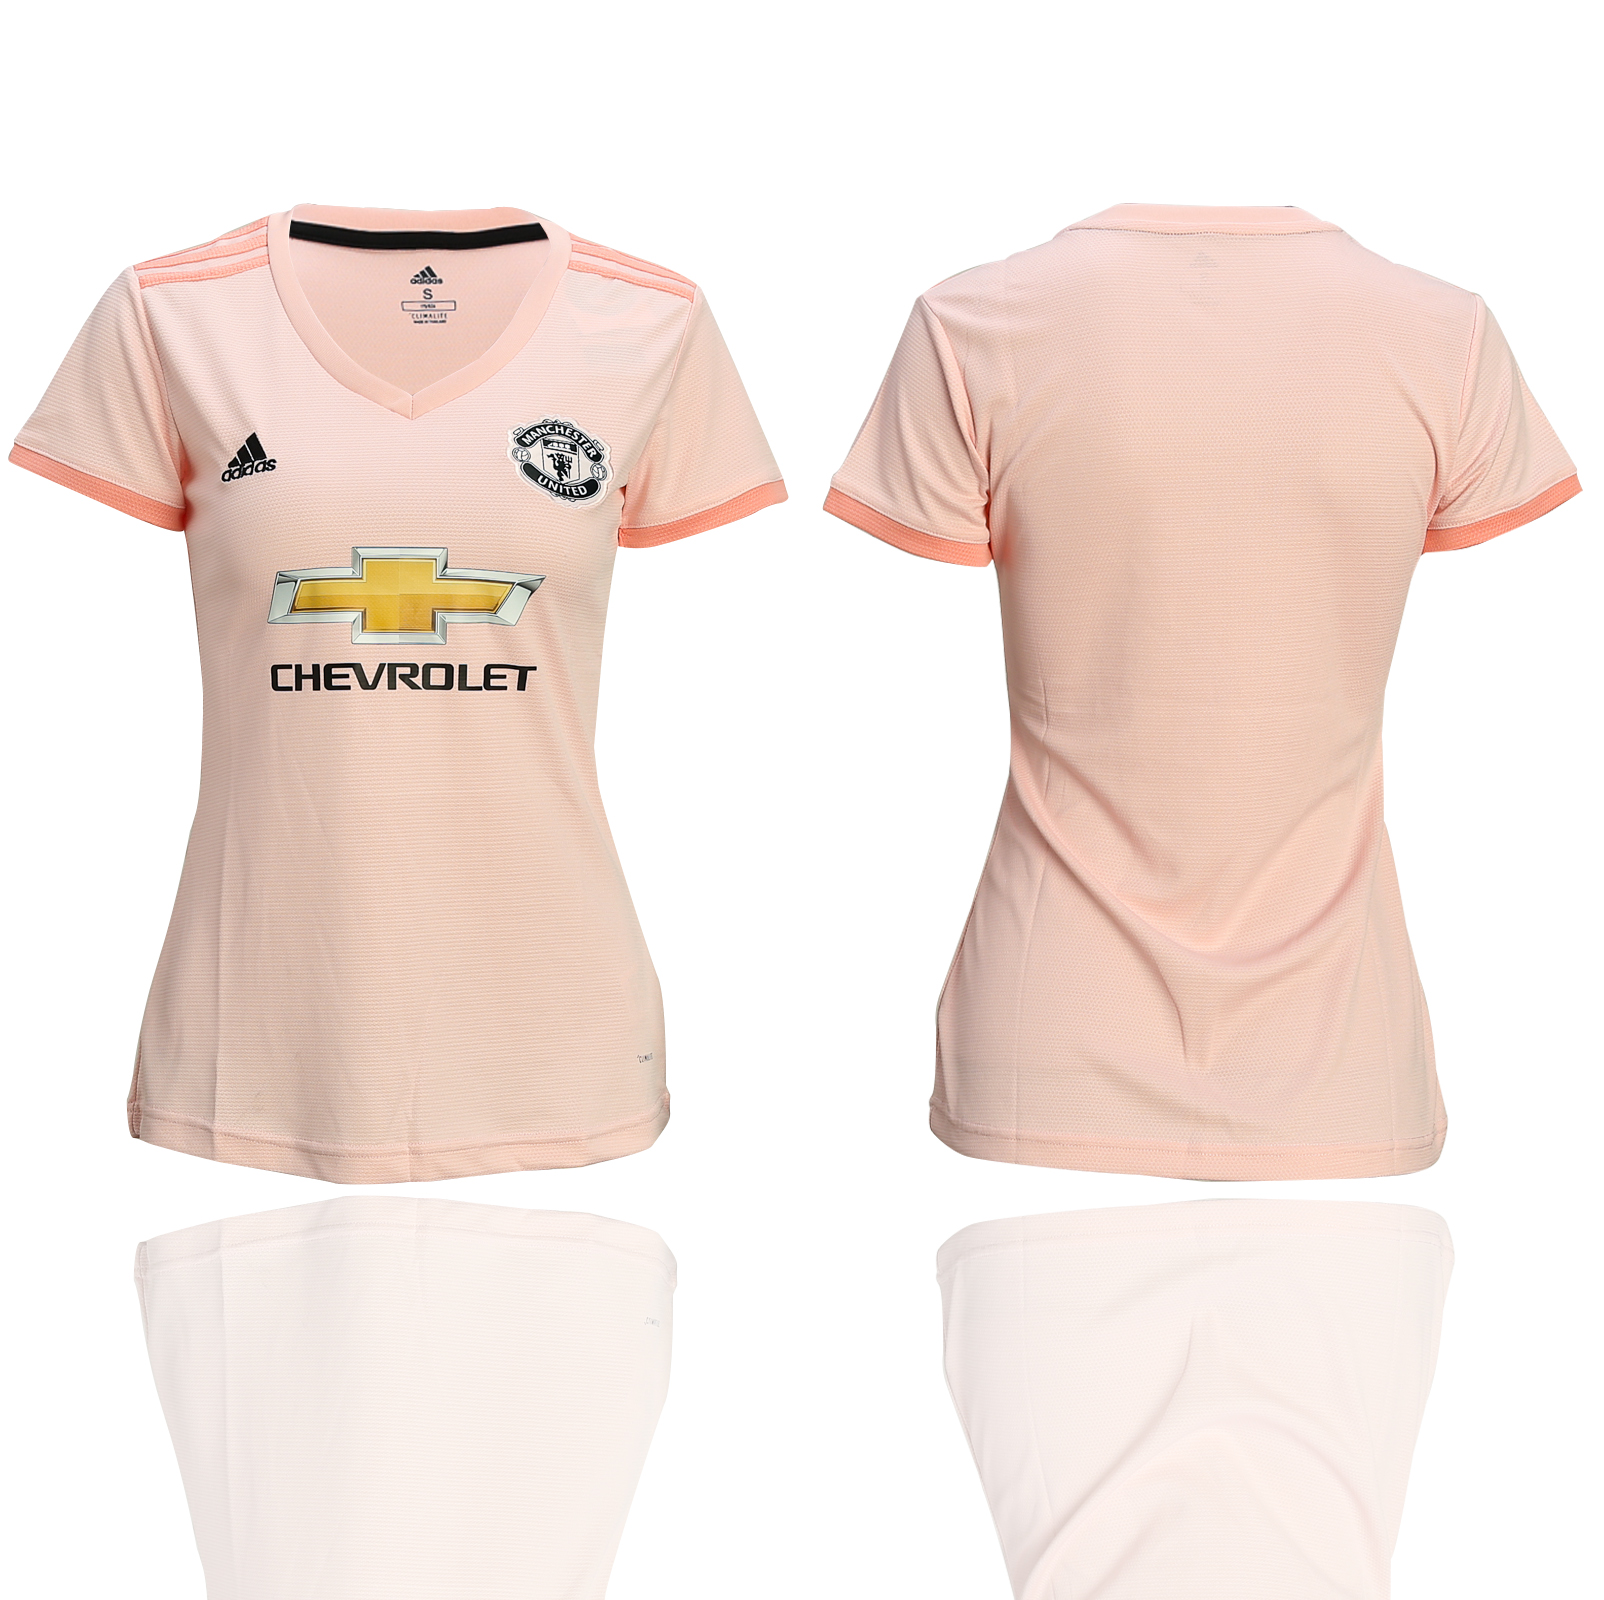 manchester united peach jersey